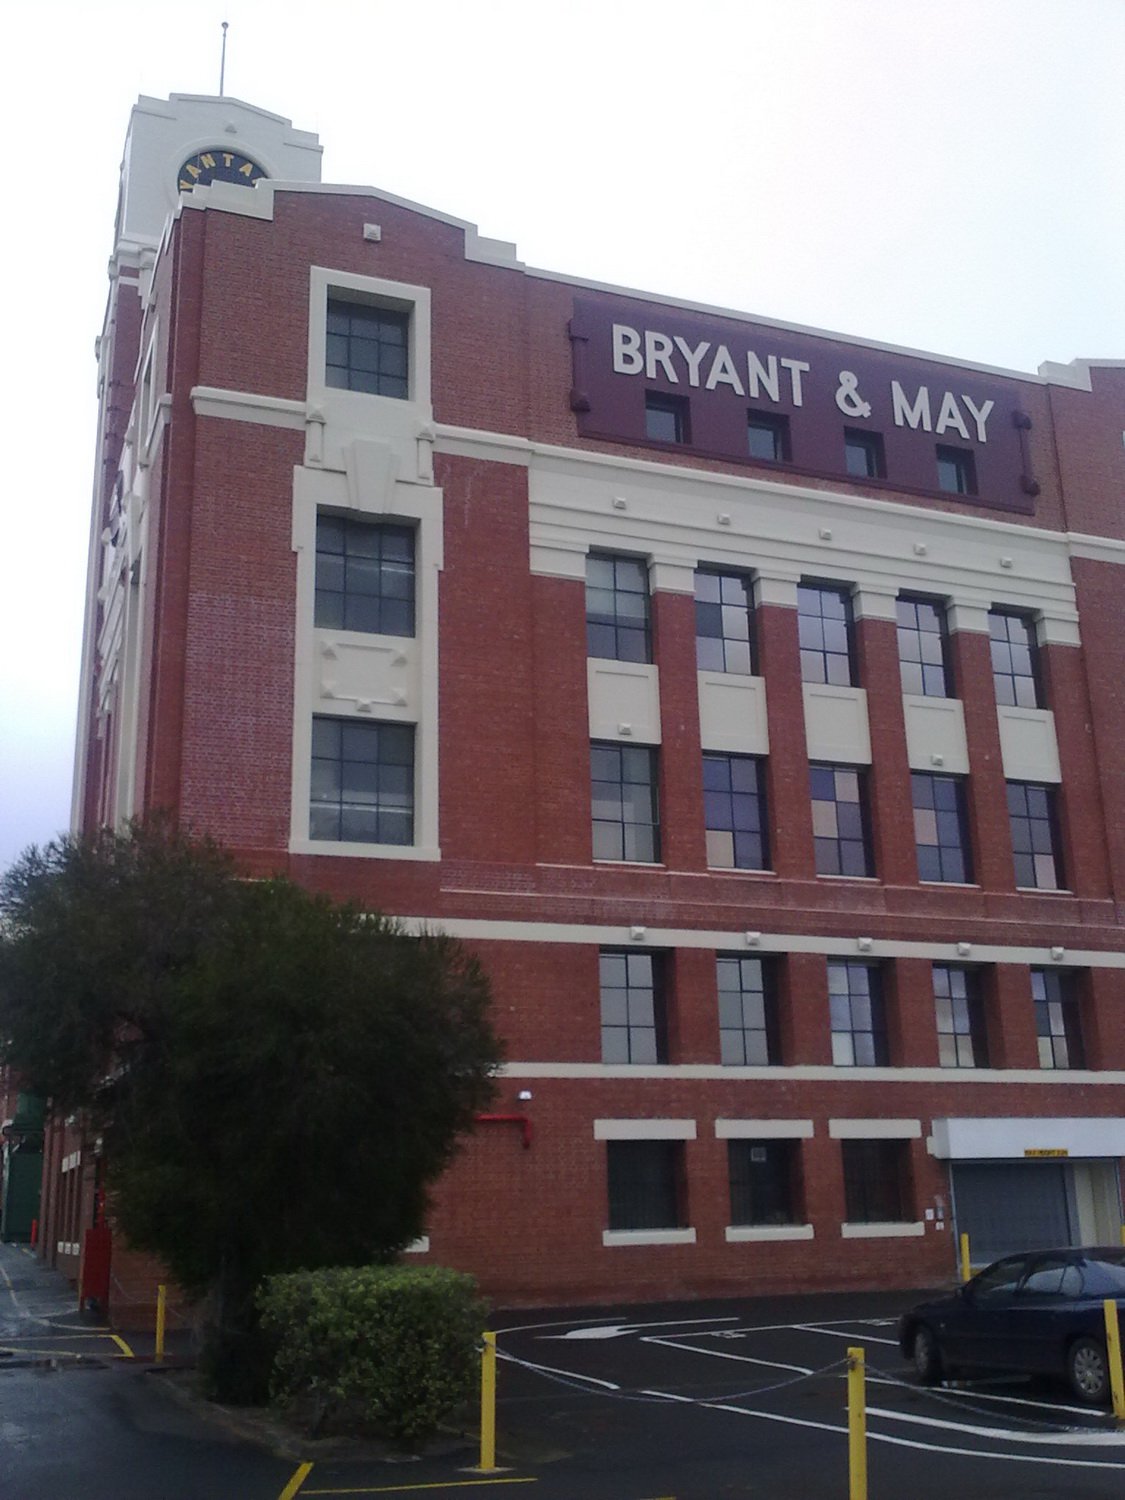 Bryant & May's old match factory. This factory featured  in the "Match" book, which  had info on the match making process plus models you could make with matches and the boxes. Sept 2010.